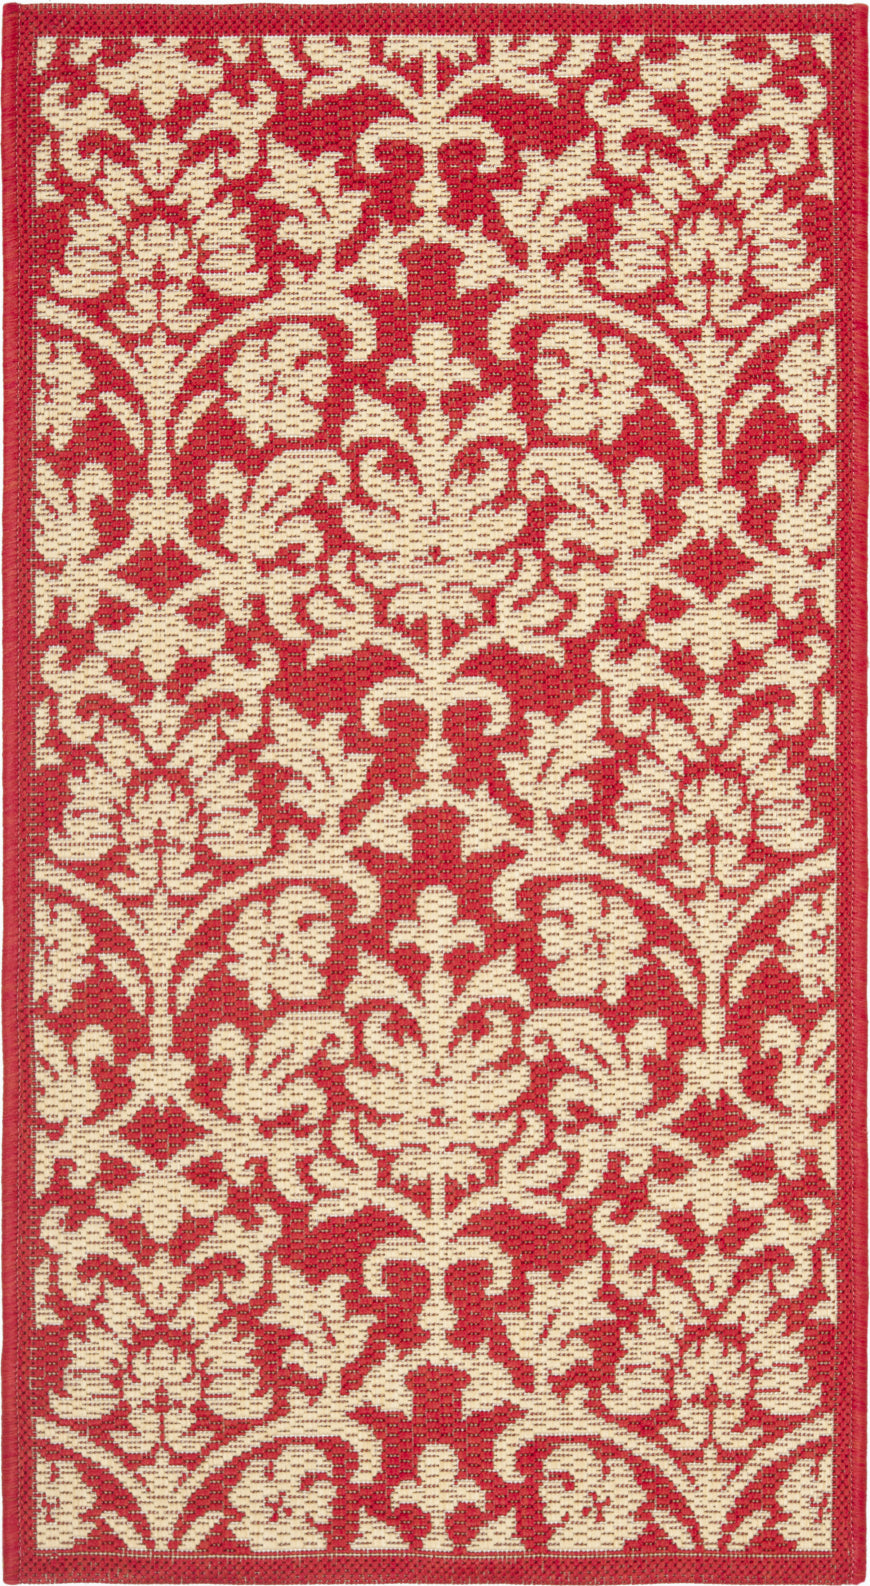 Safavieh Courtyard CY3416 Red/Natural Area Rug main image